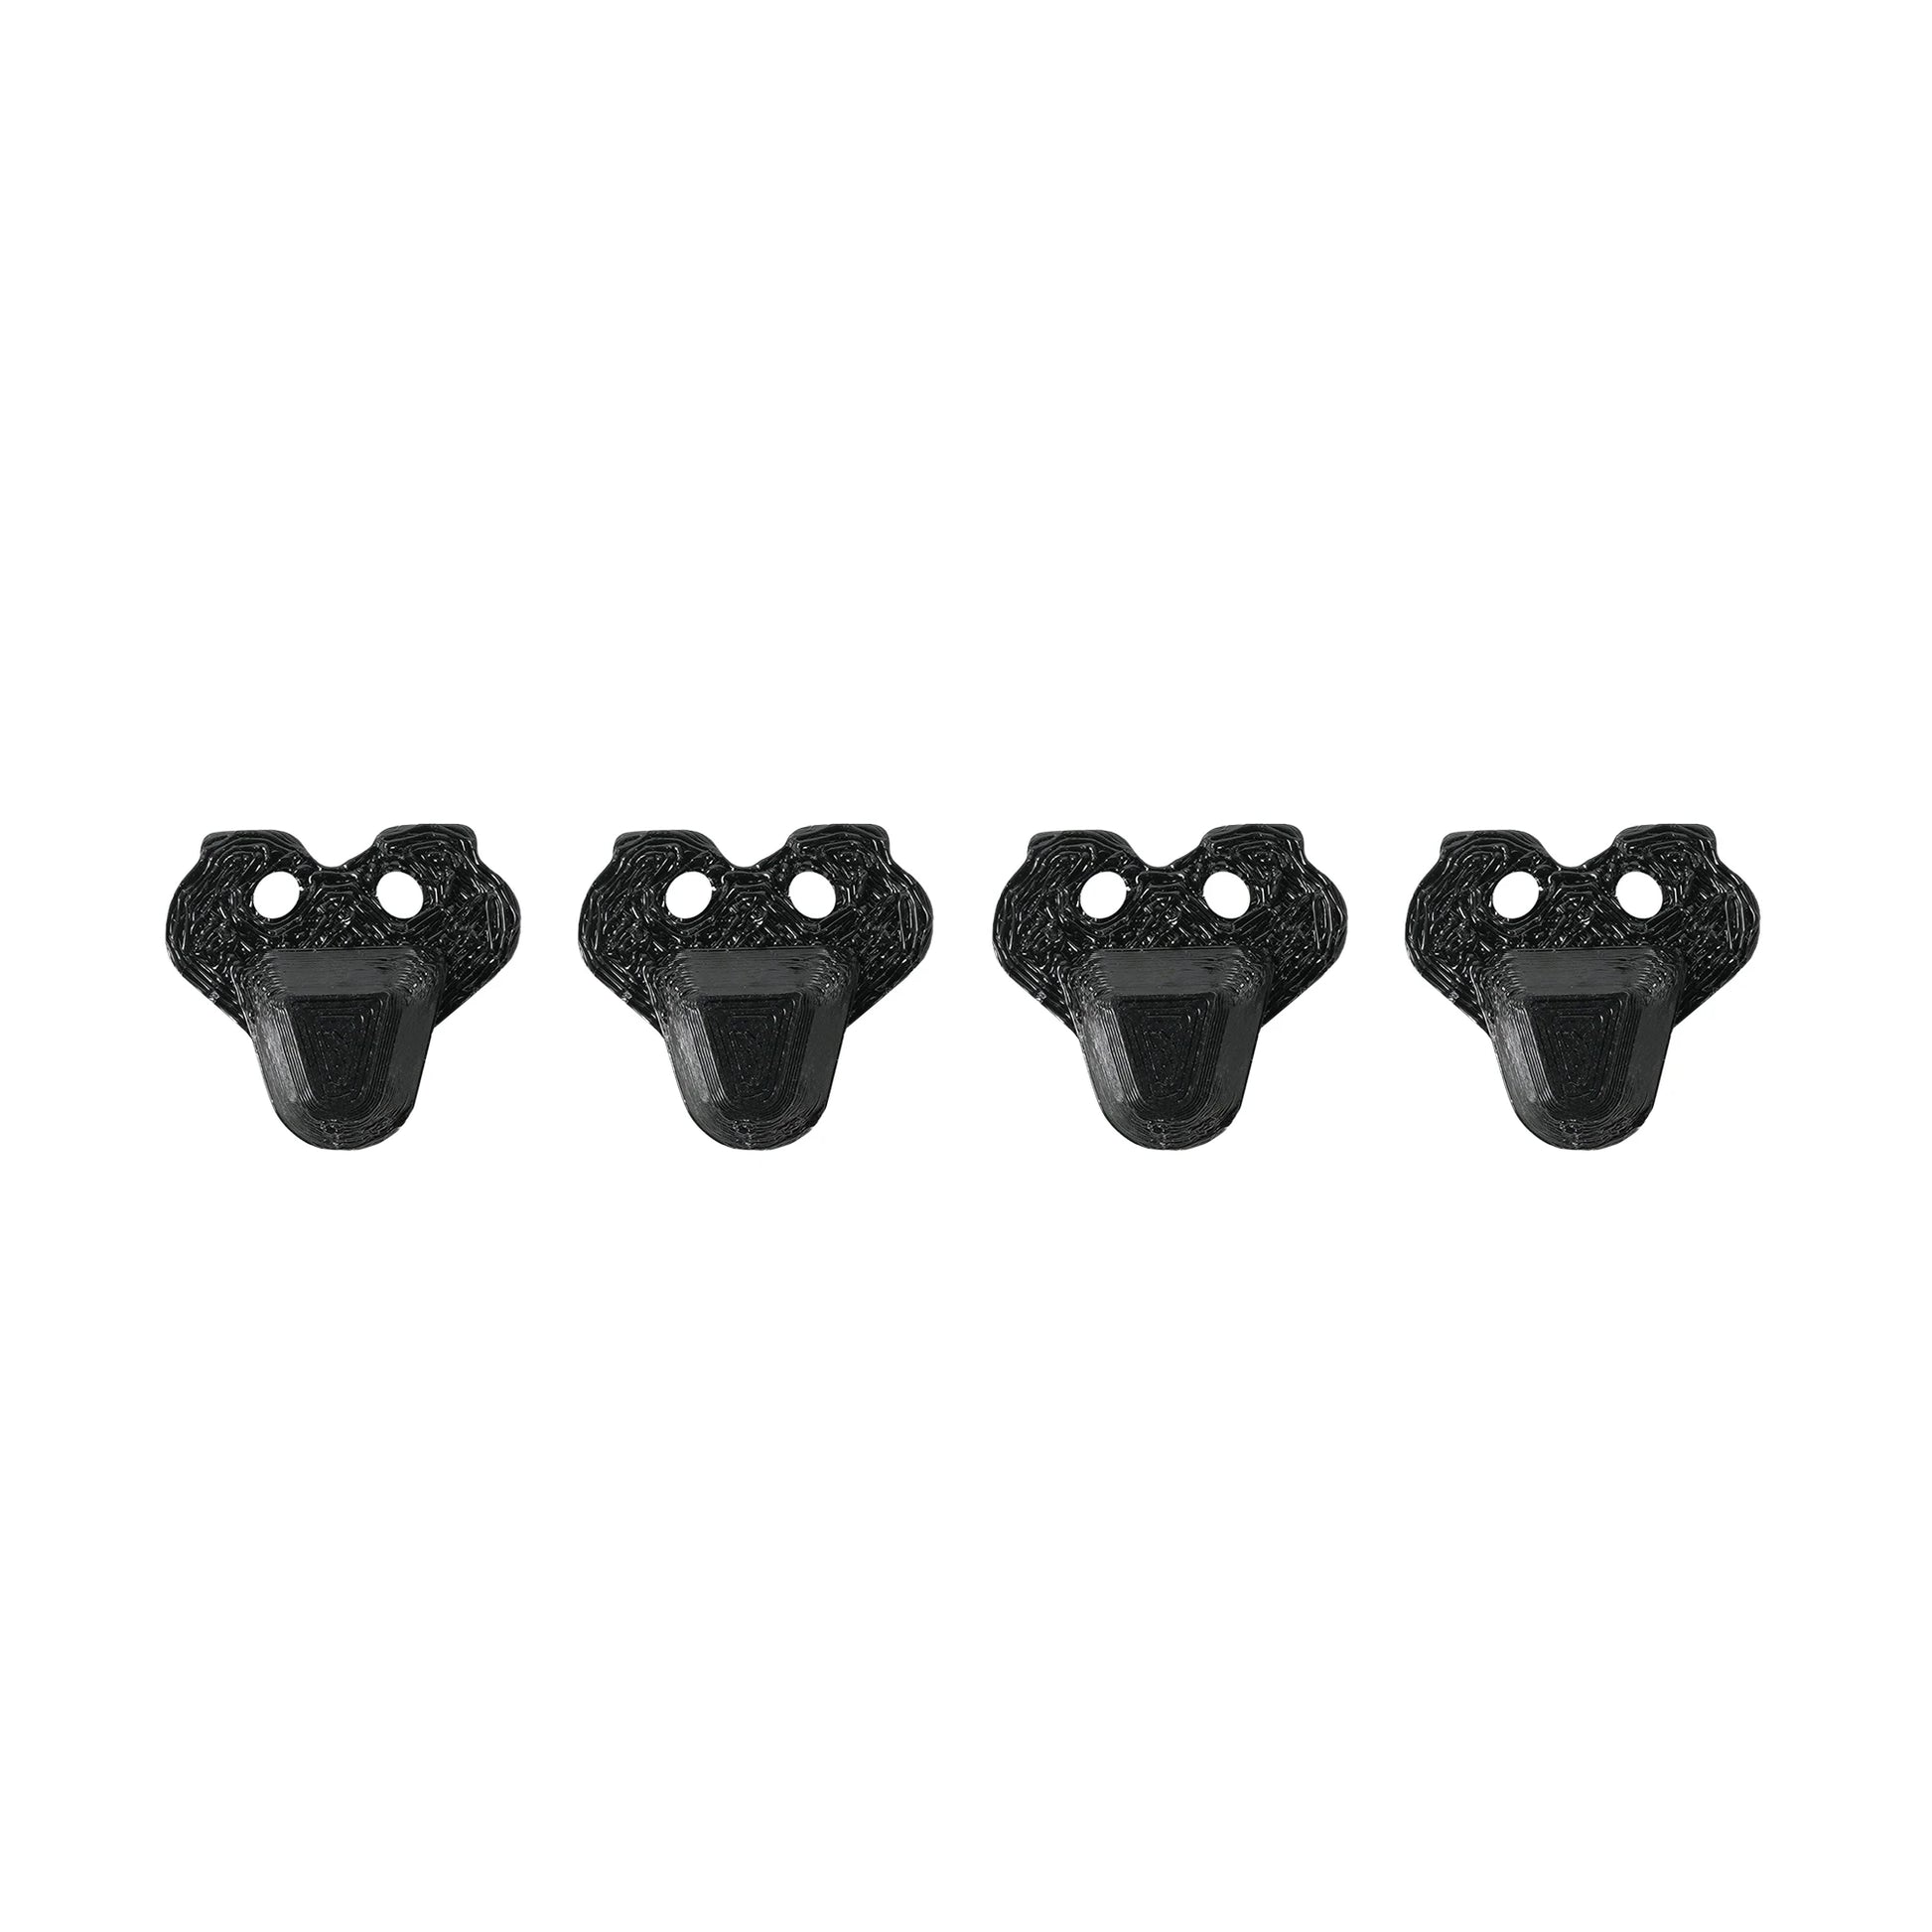 GEPRC GEP-DoMain Frame Parts - Suitable DoMain3.6 DoMain4.2 Drone Replacement Repair RC DIY FPV Freestyle Rack Accessories Spare Part